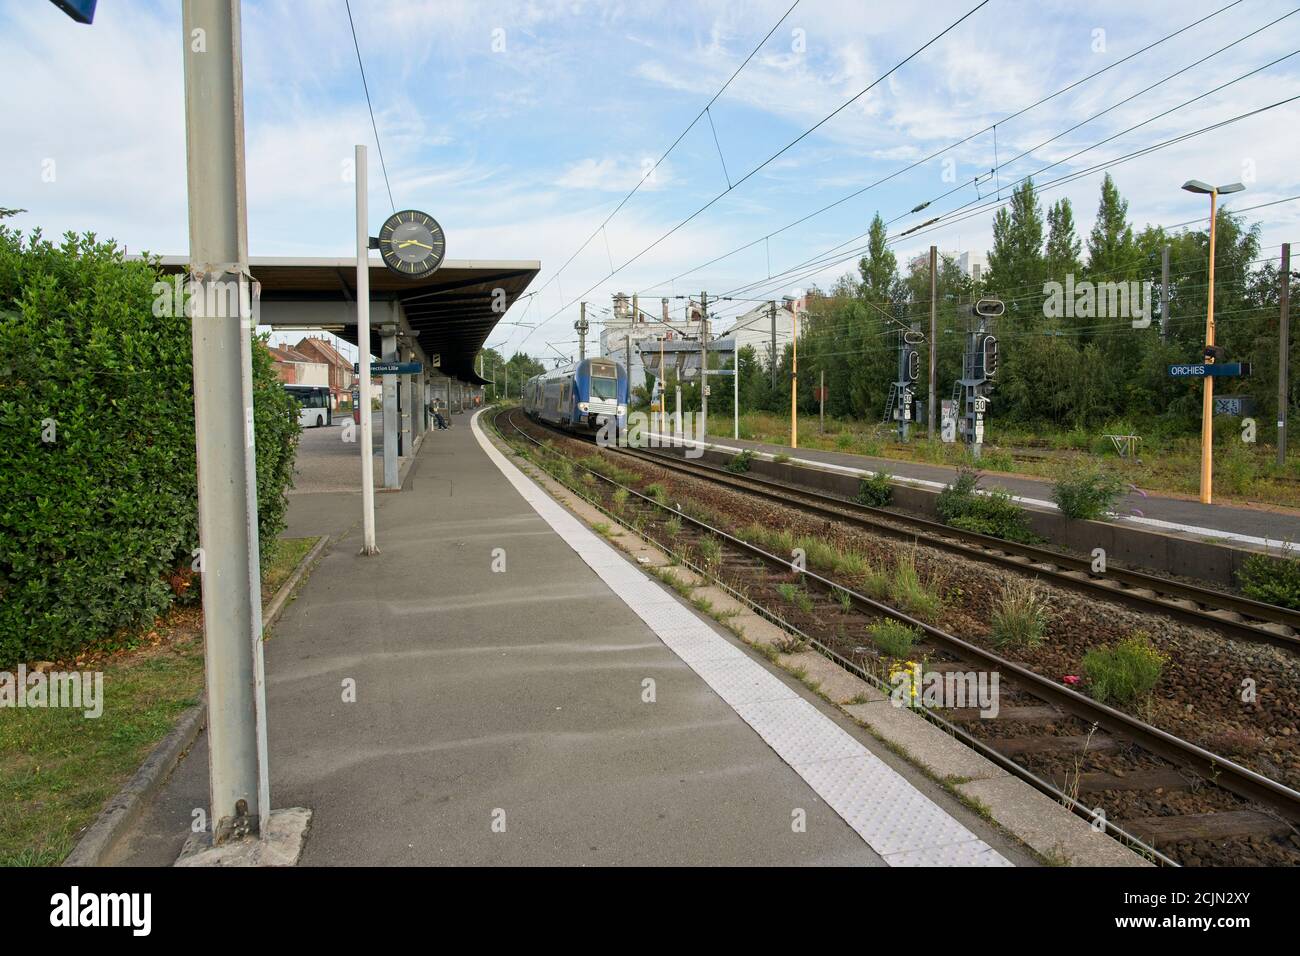 Orchies France - 3 August 2020 - Railway station of Orchies on line from Lille to Valenciennes in France Stock Photo